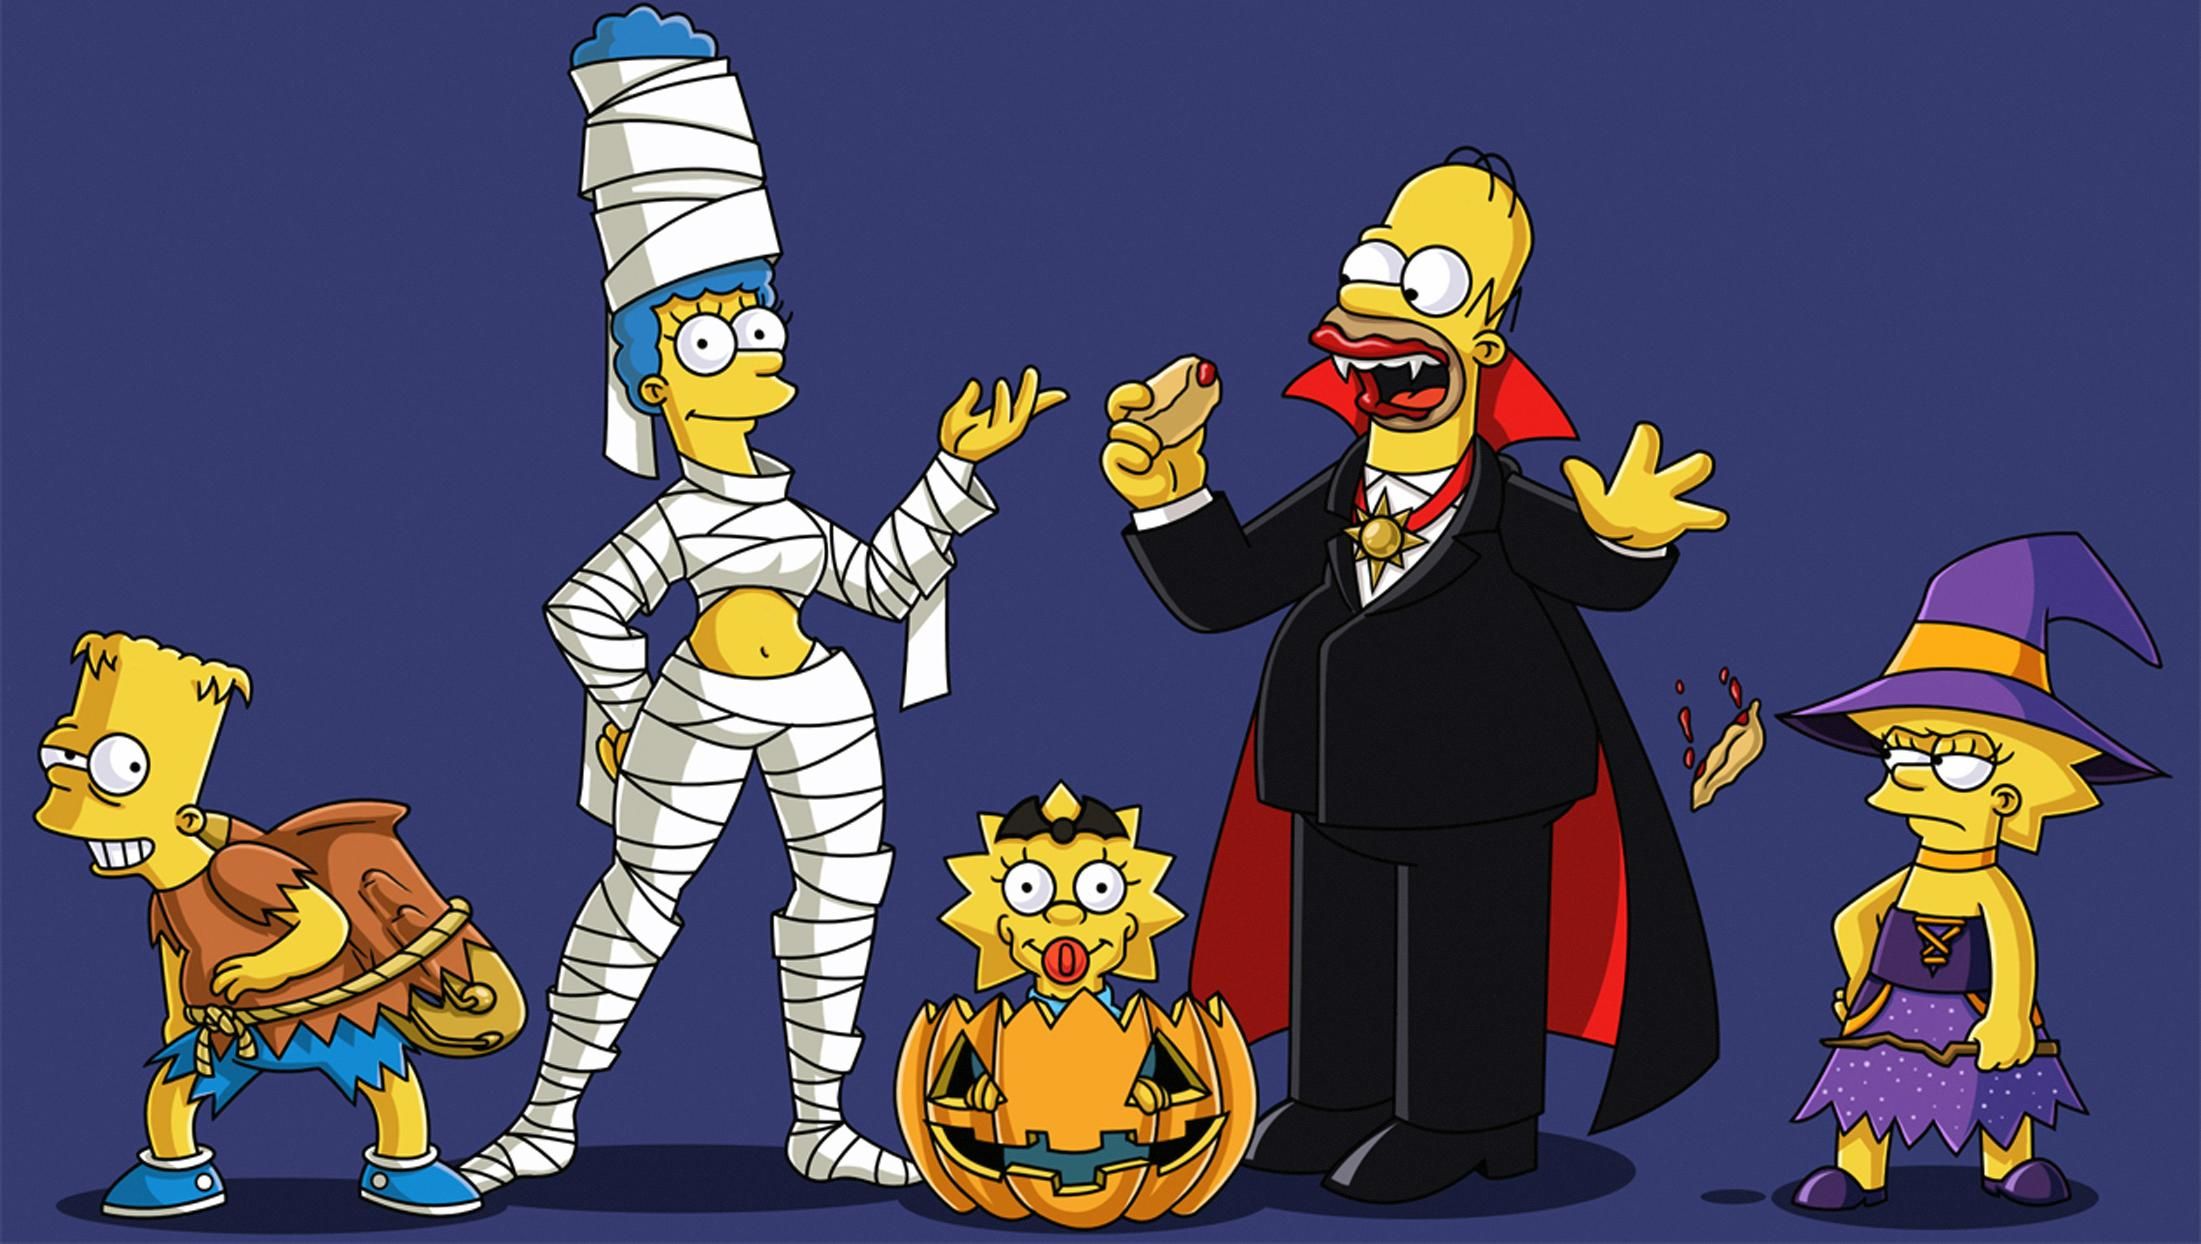 Best Halloween Episodes from Your Favorite Shows. Her Campus. Simpsons halloween, Simpsons treehouse of horror, Halloween episodes